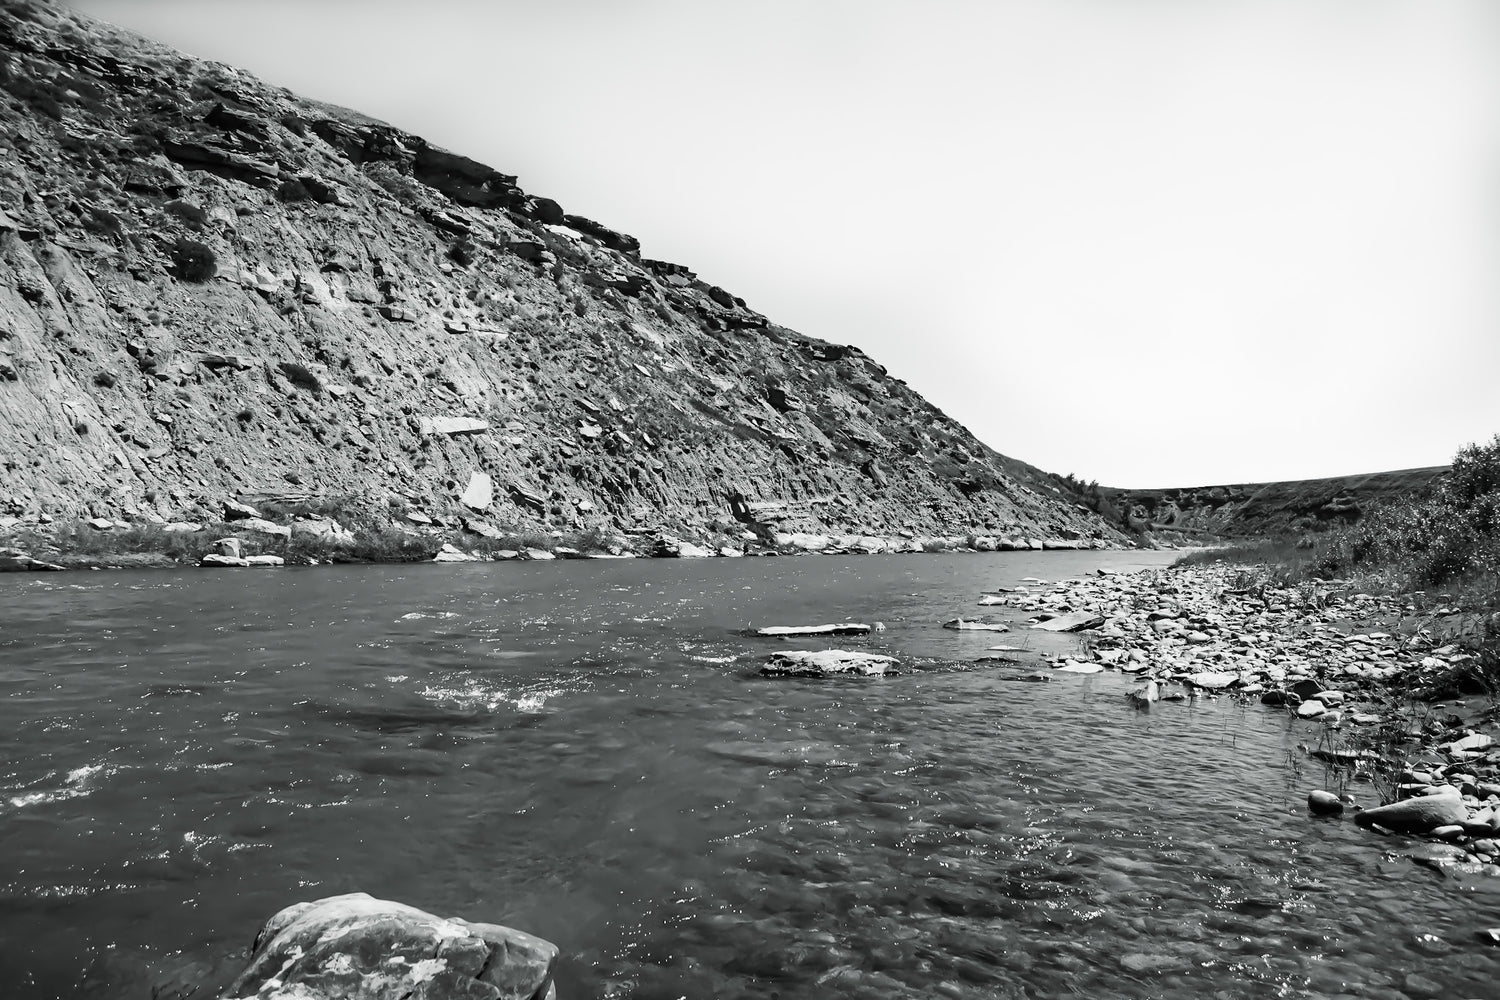 Black and white image of the Two Medicine River with its rocky breaks